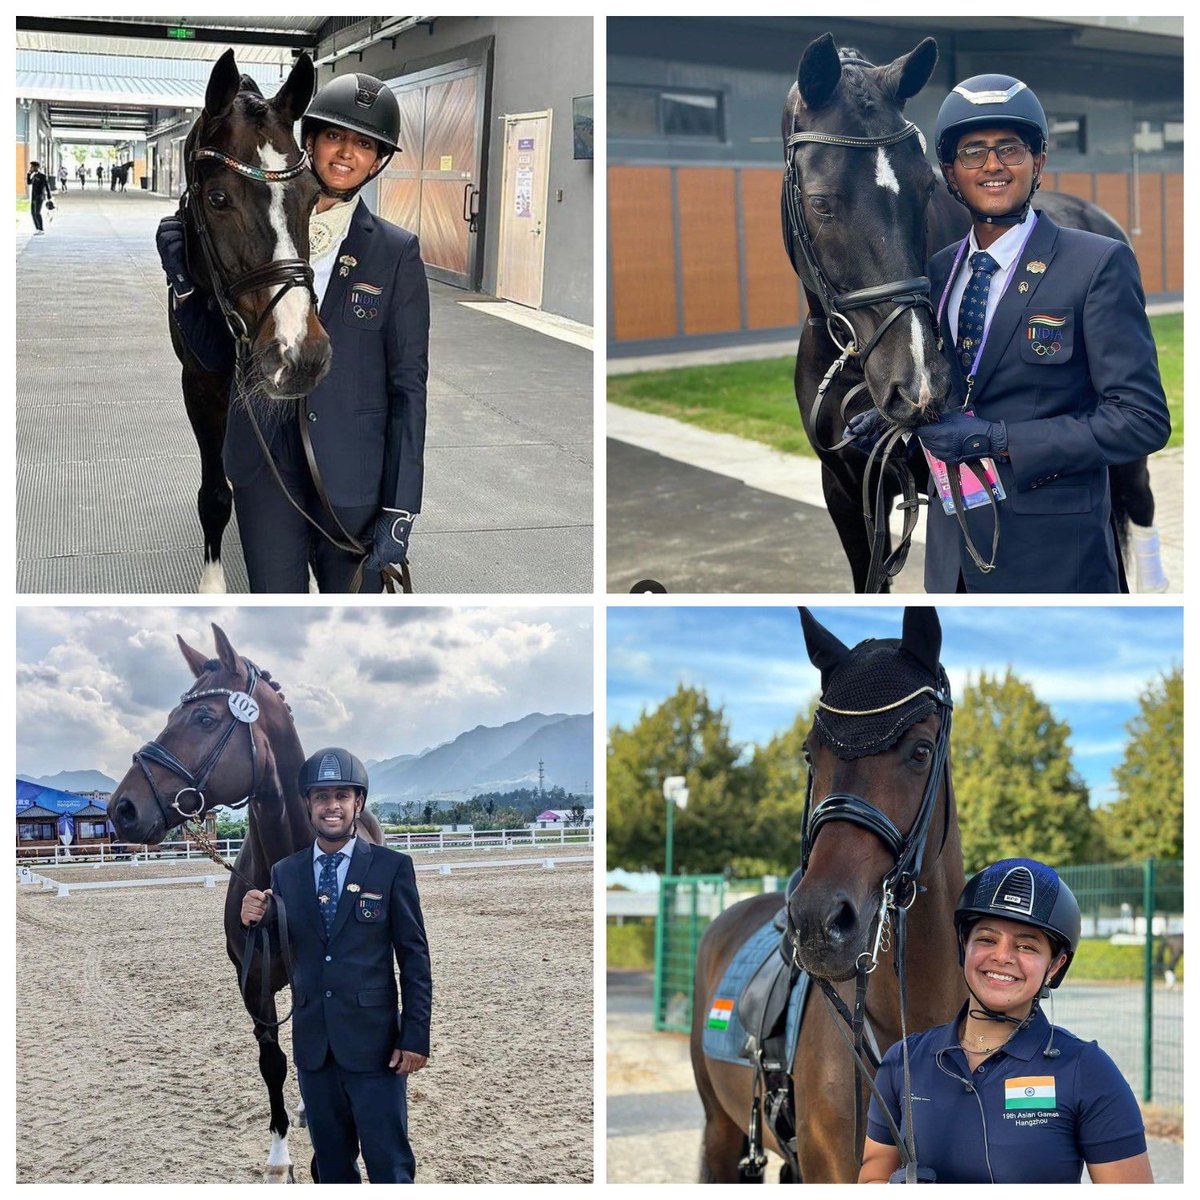 It is a matter of extreme pride that after several decades, our Equestrian Dressage Team has won Gold in Asian Games! Hriday Chheda, Anush Agarwalla, Sudipti Hajela and Divyakriit Singh have displayed unparalleled skill, teamwork and brought honour to our nation on the…